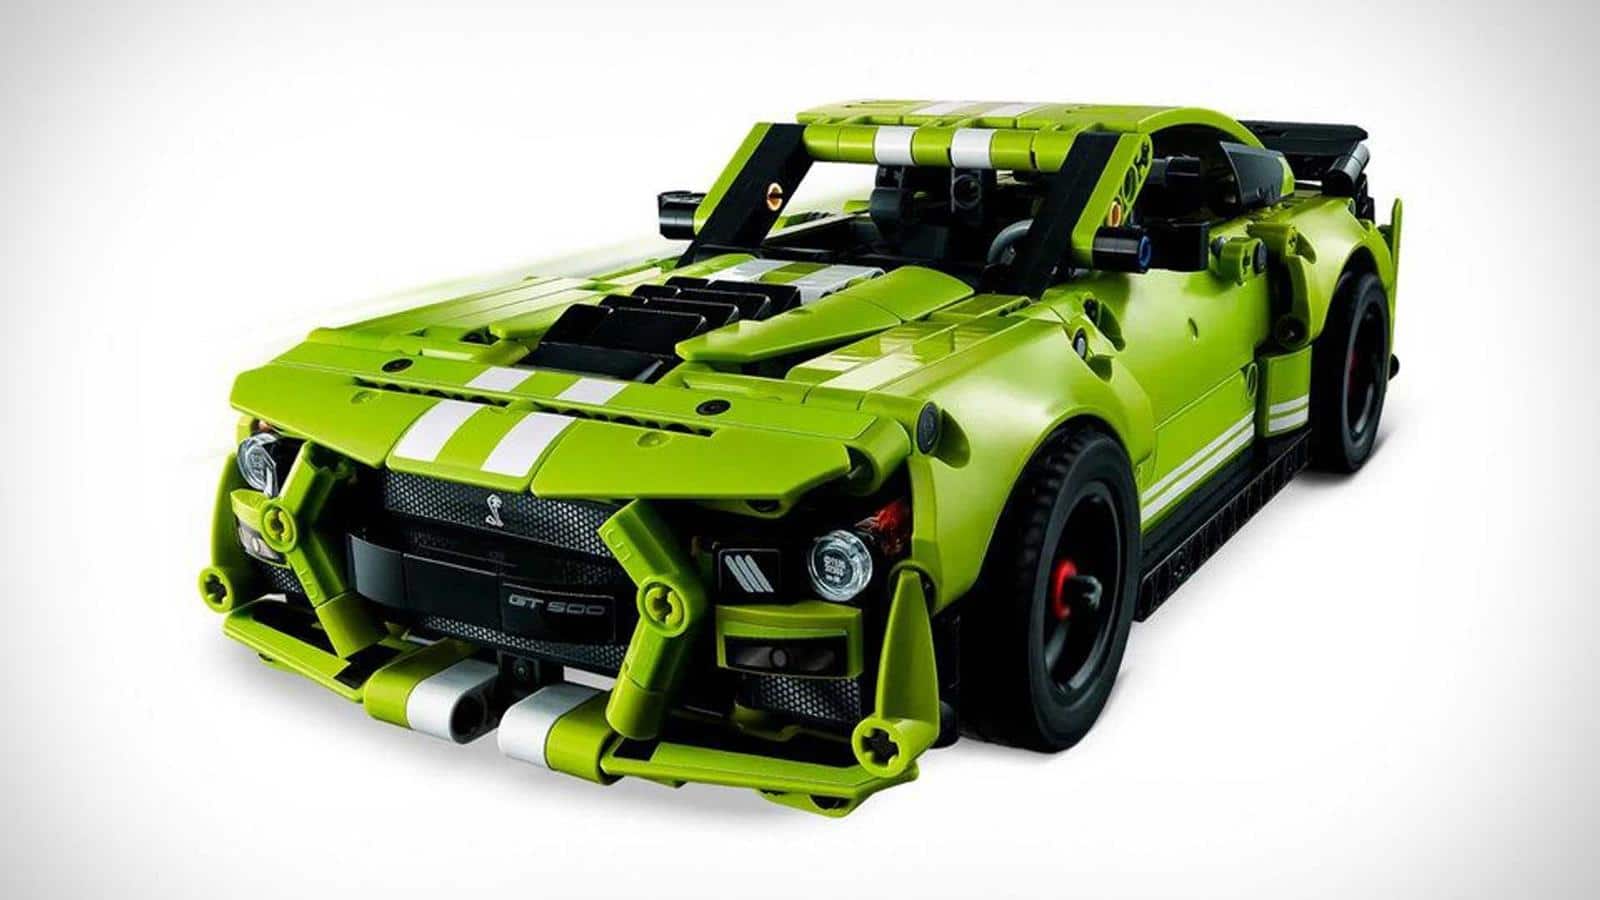 Mustang for PLN 200?  With LEGO it's possible!  A new set of blocks has been debuted